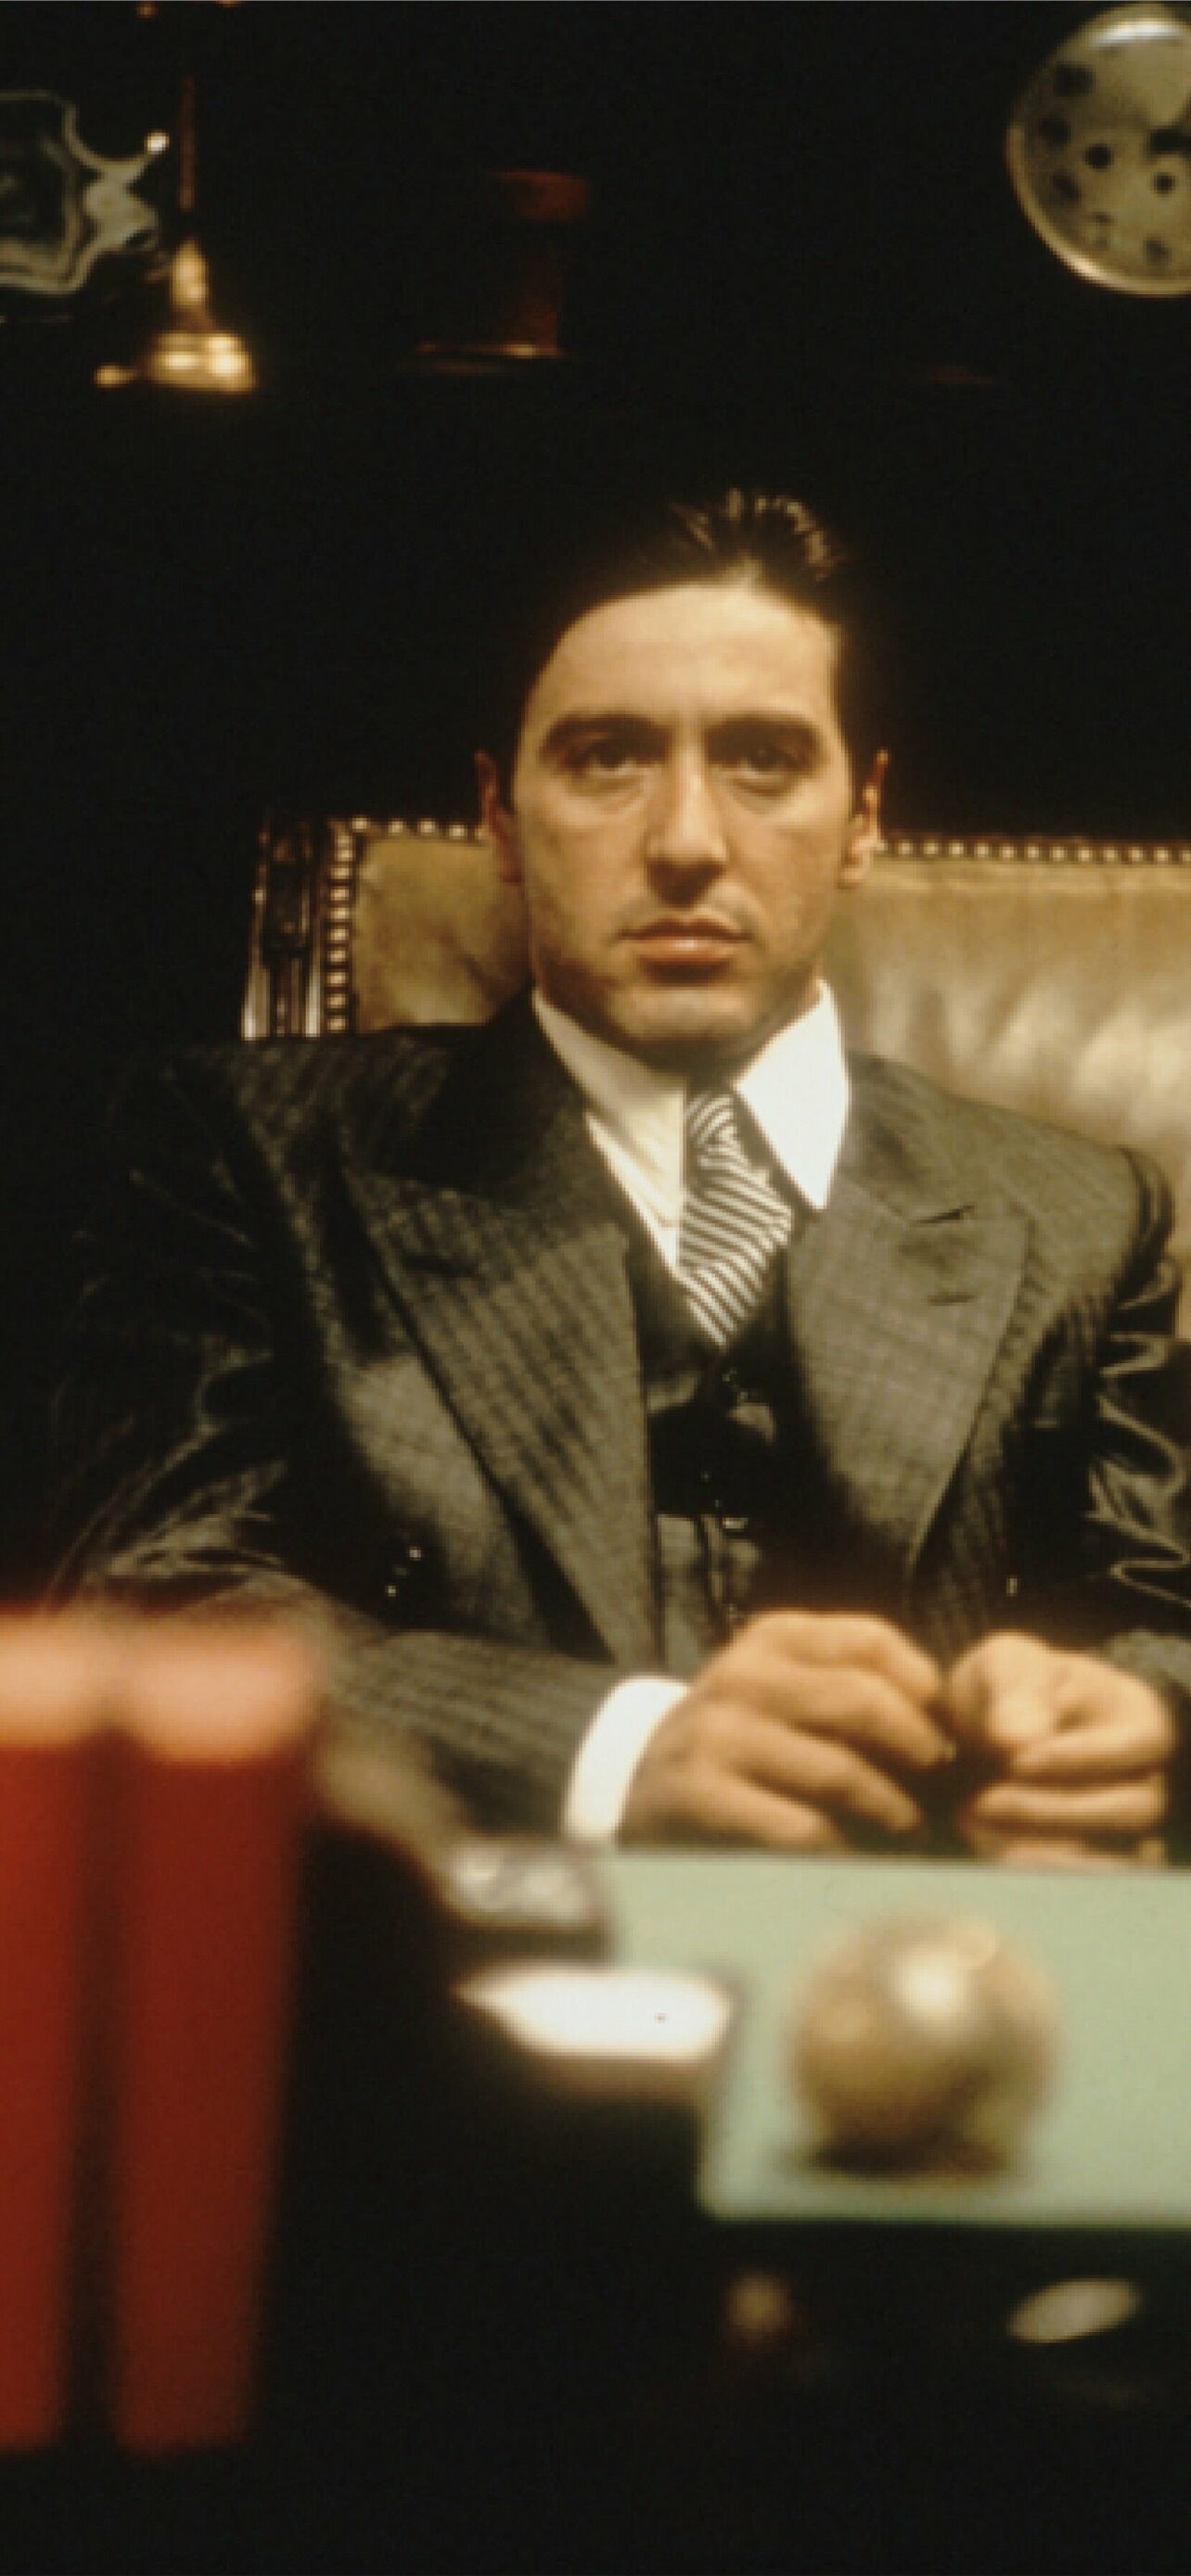 The Godfather: Al Pacino as Michael Corleone: Vito's youngest son. 1290x2780 HD Background.